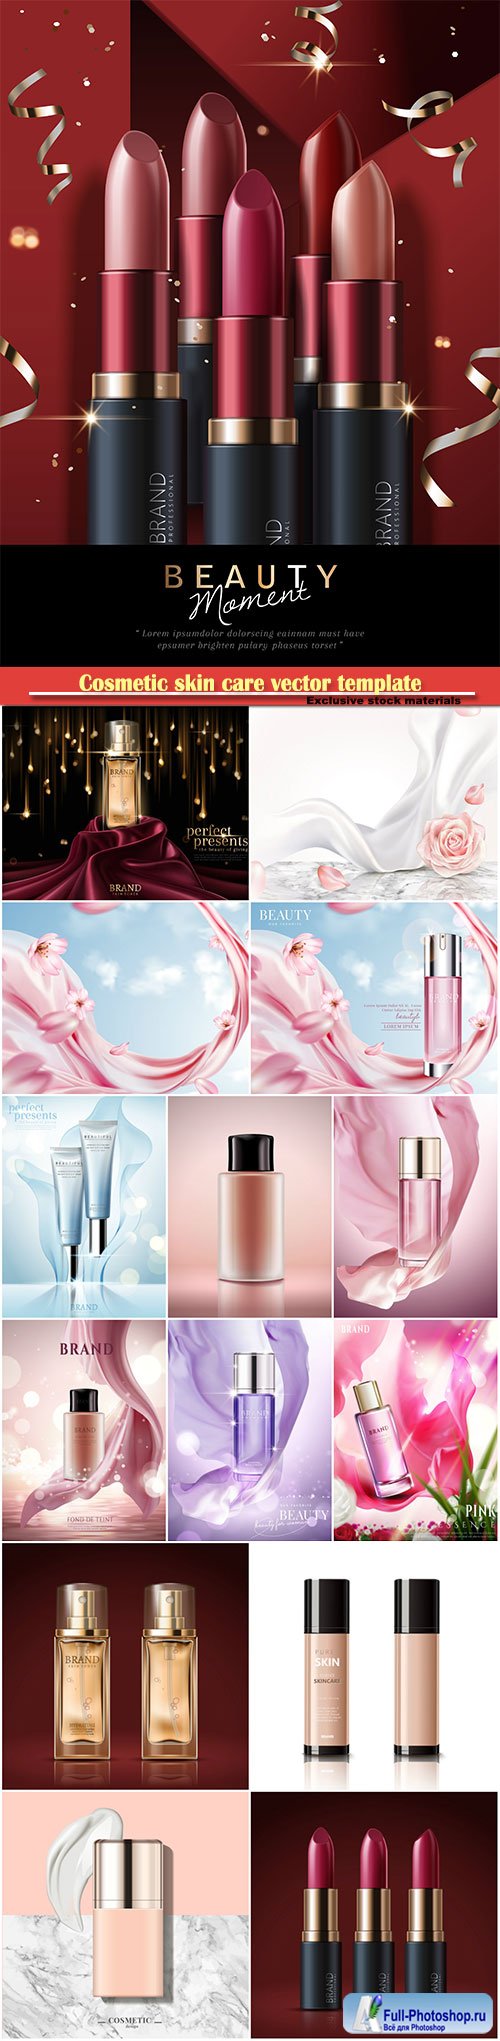 Cosmetic skin care vector template, refreshing skin care tube ads